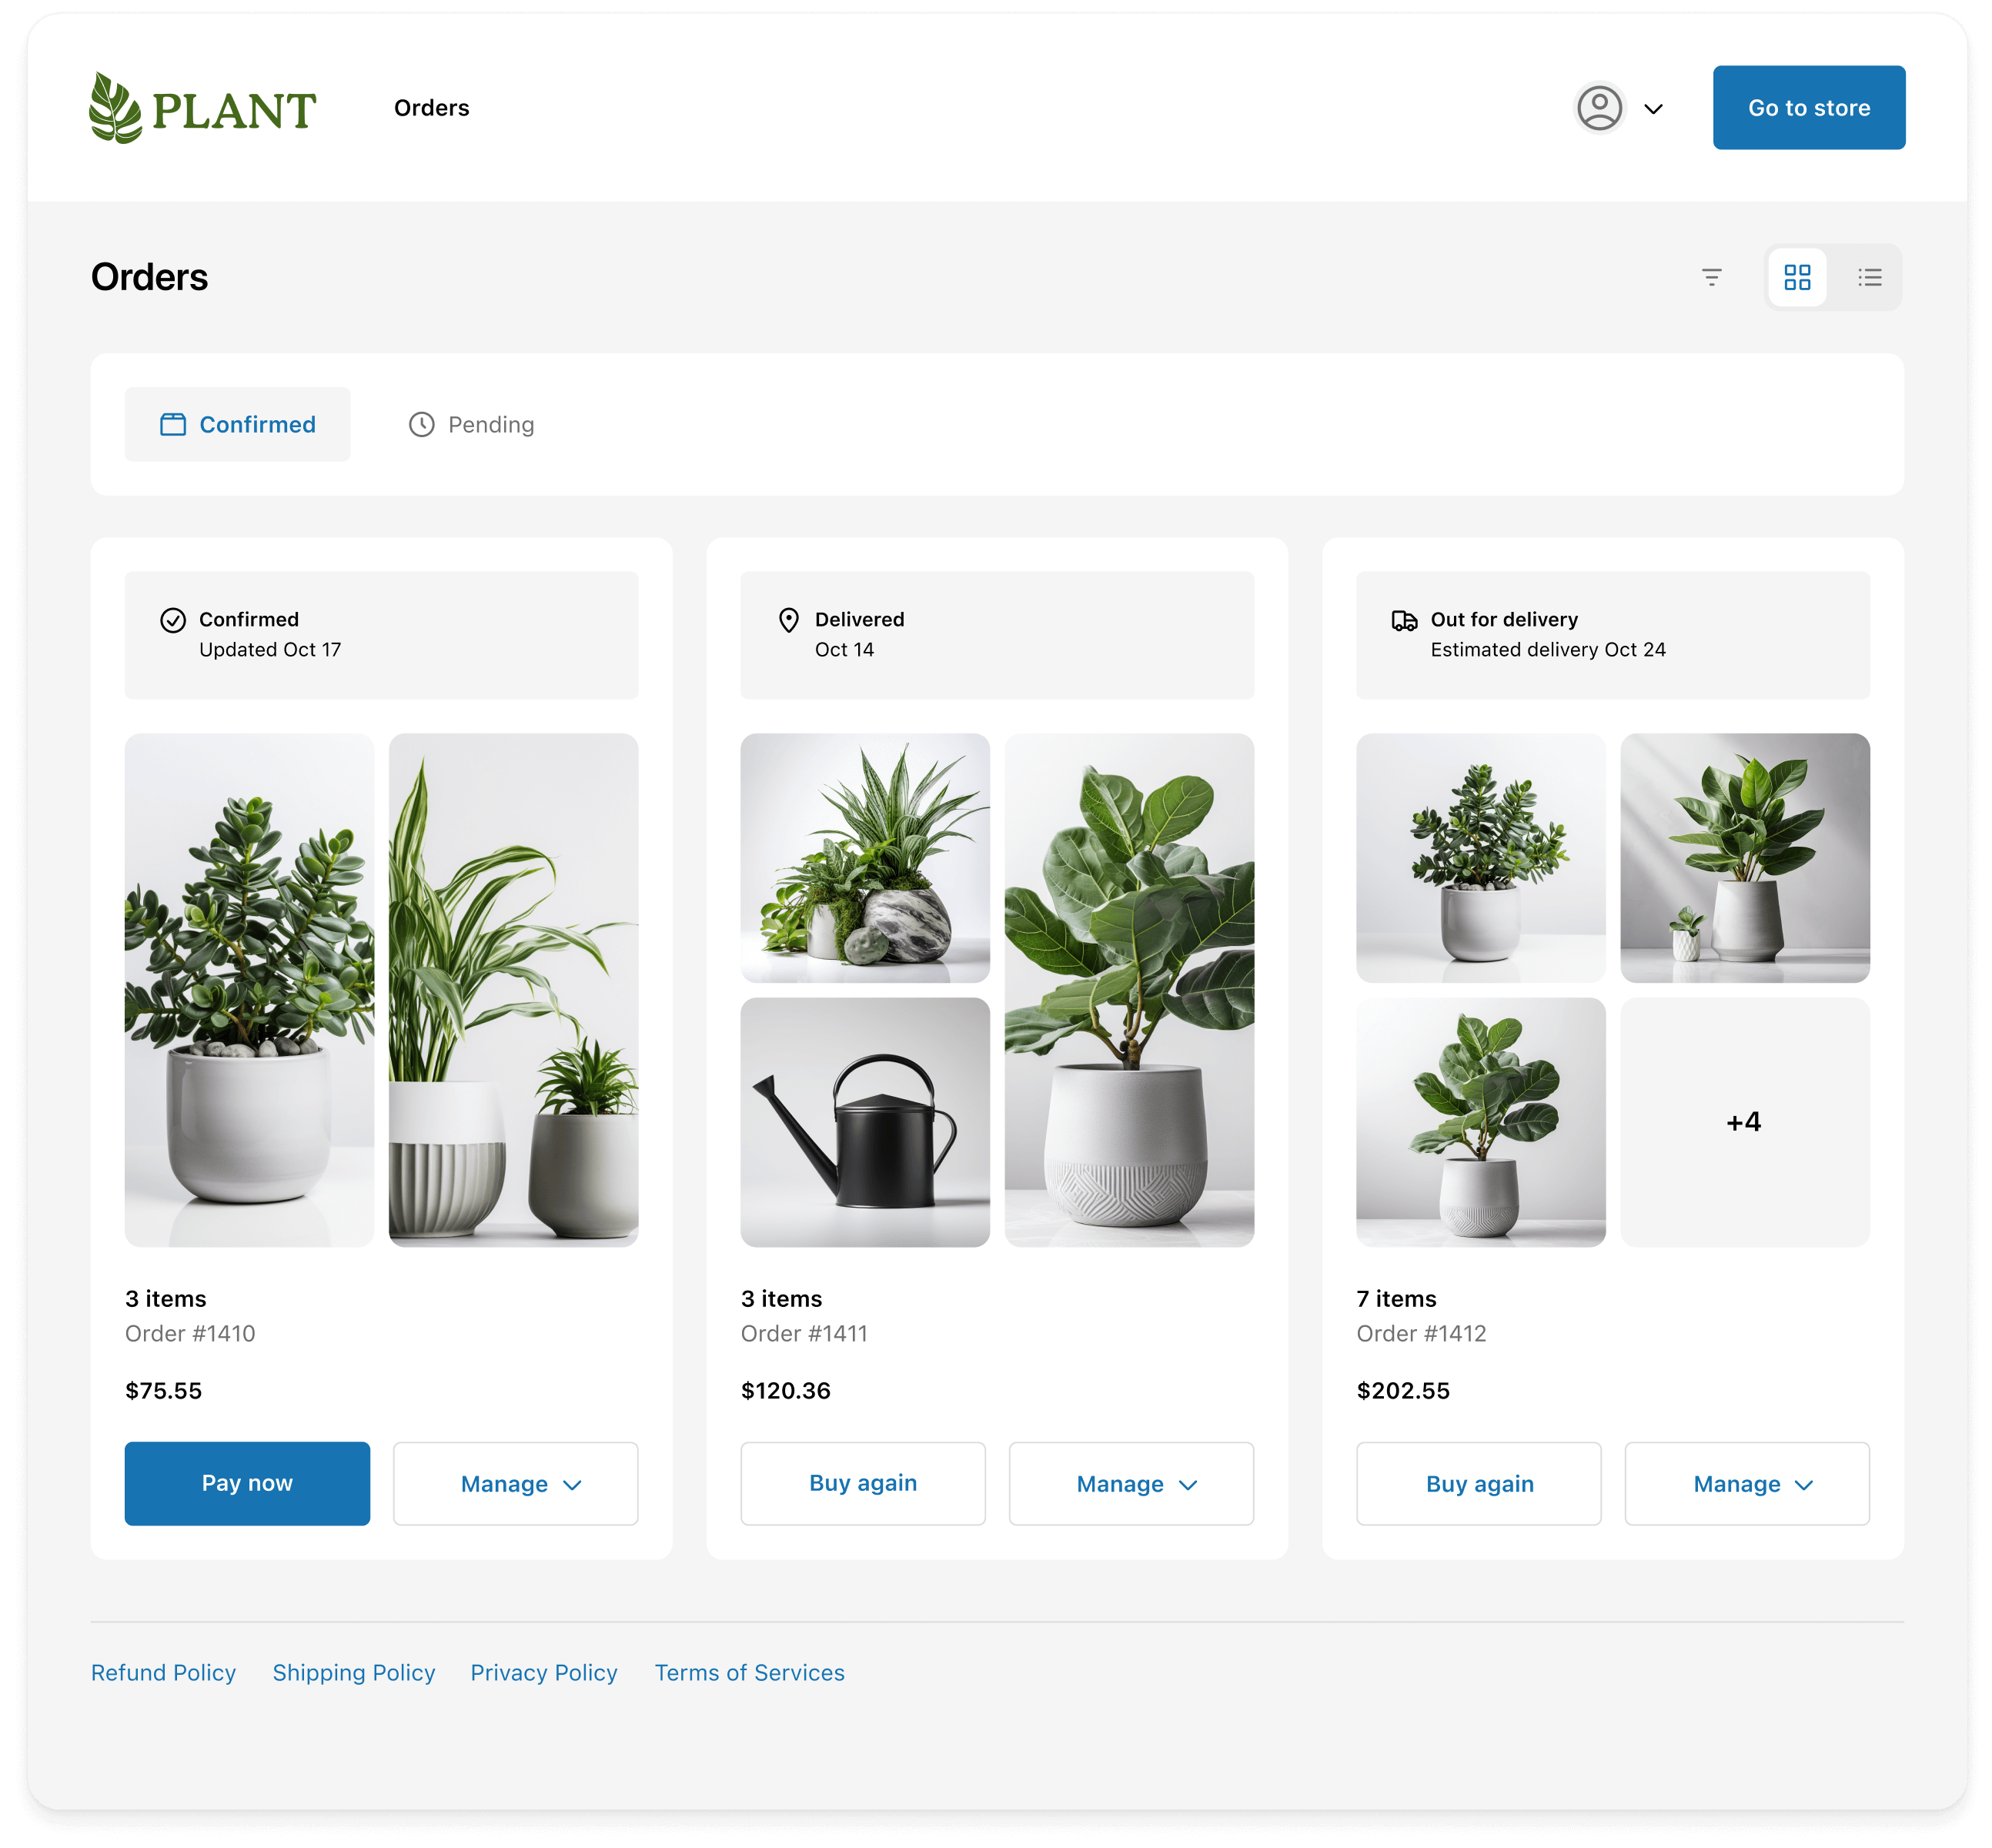 The Order index page showing three orders that contain various plants. One order is in the the Confirmed status, one in the Delivered status, and one is in the Out for delivery status.